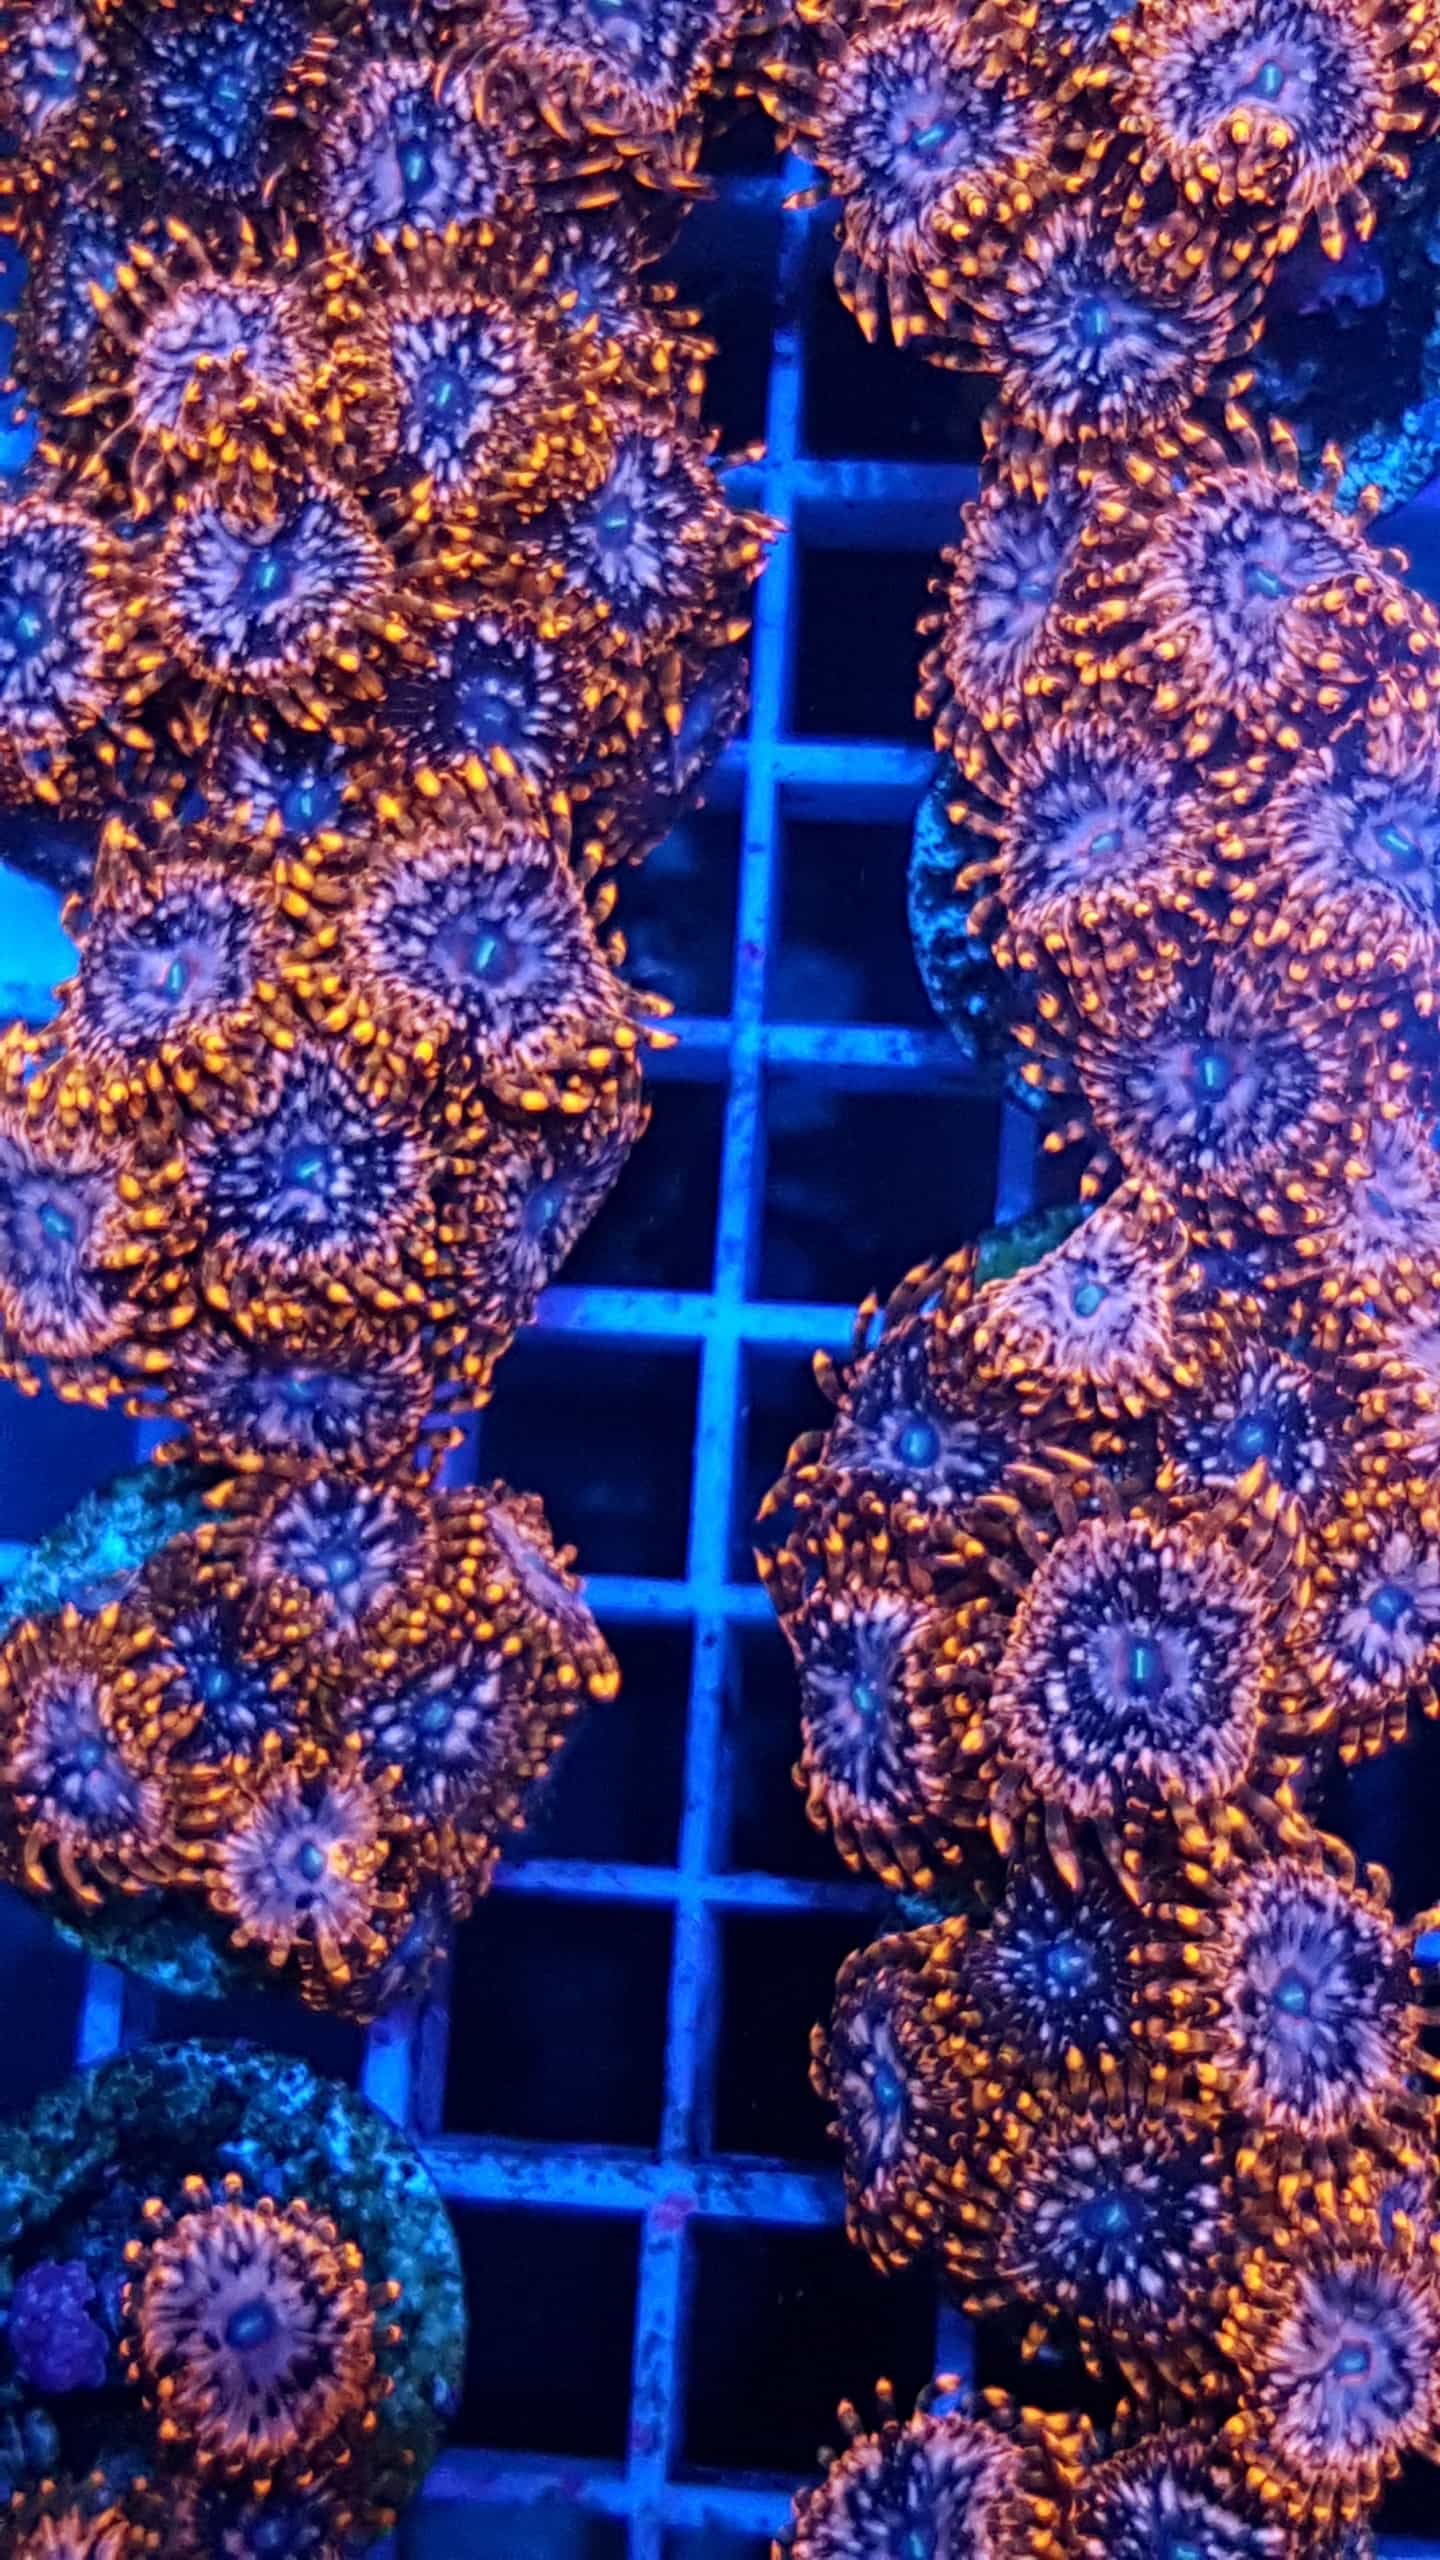 Zoa/Paly Candy Apple mind 5 Polypen